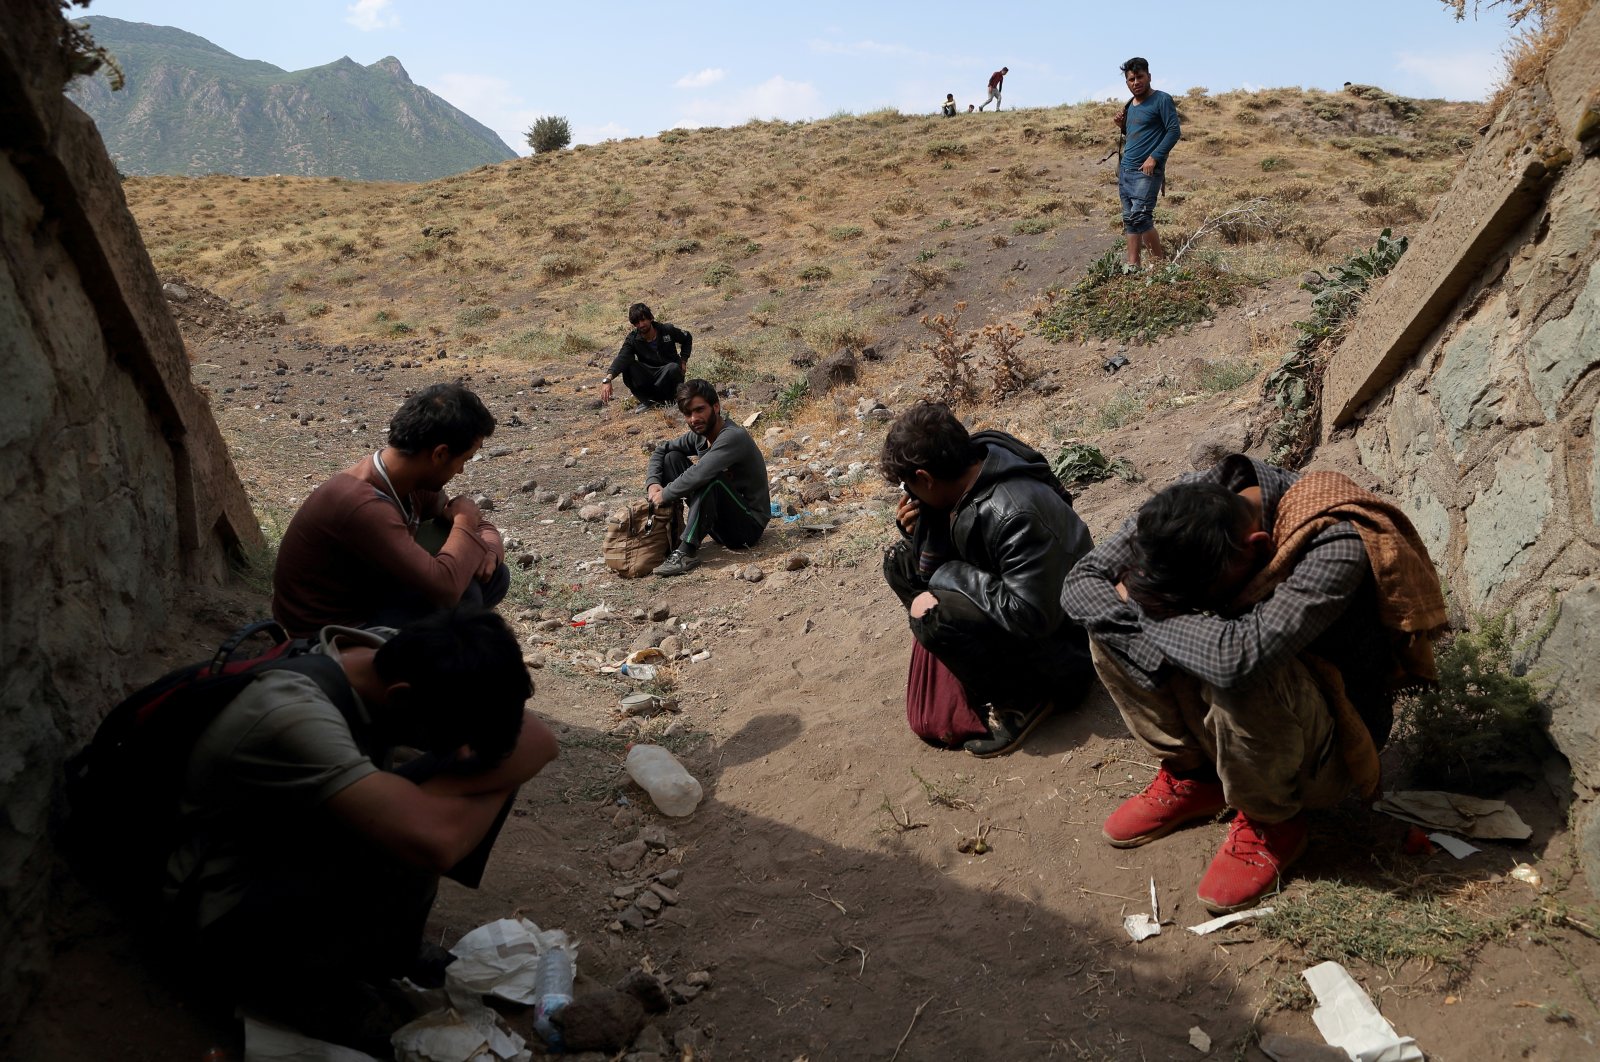 Afghan migrants hide from security forces after crossing illegally into Turkey from Iran, near Tatvan in Bitlis province, Turkey Aug. 23, 2021. (Reuters File Photo)